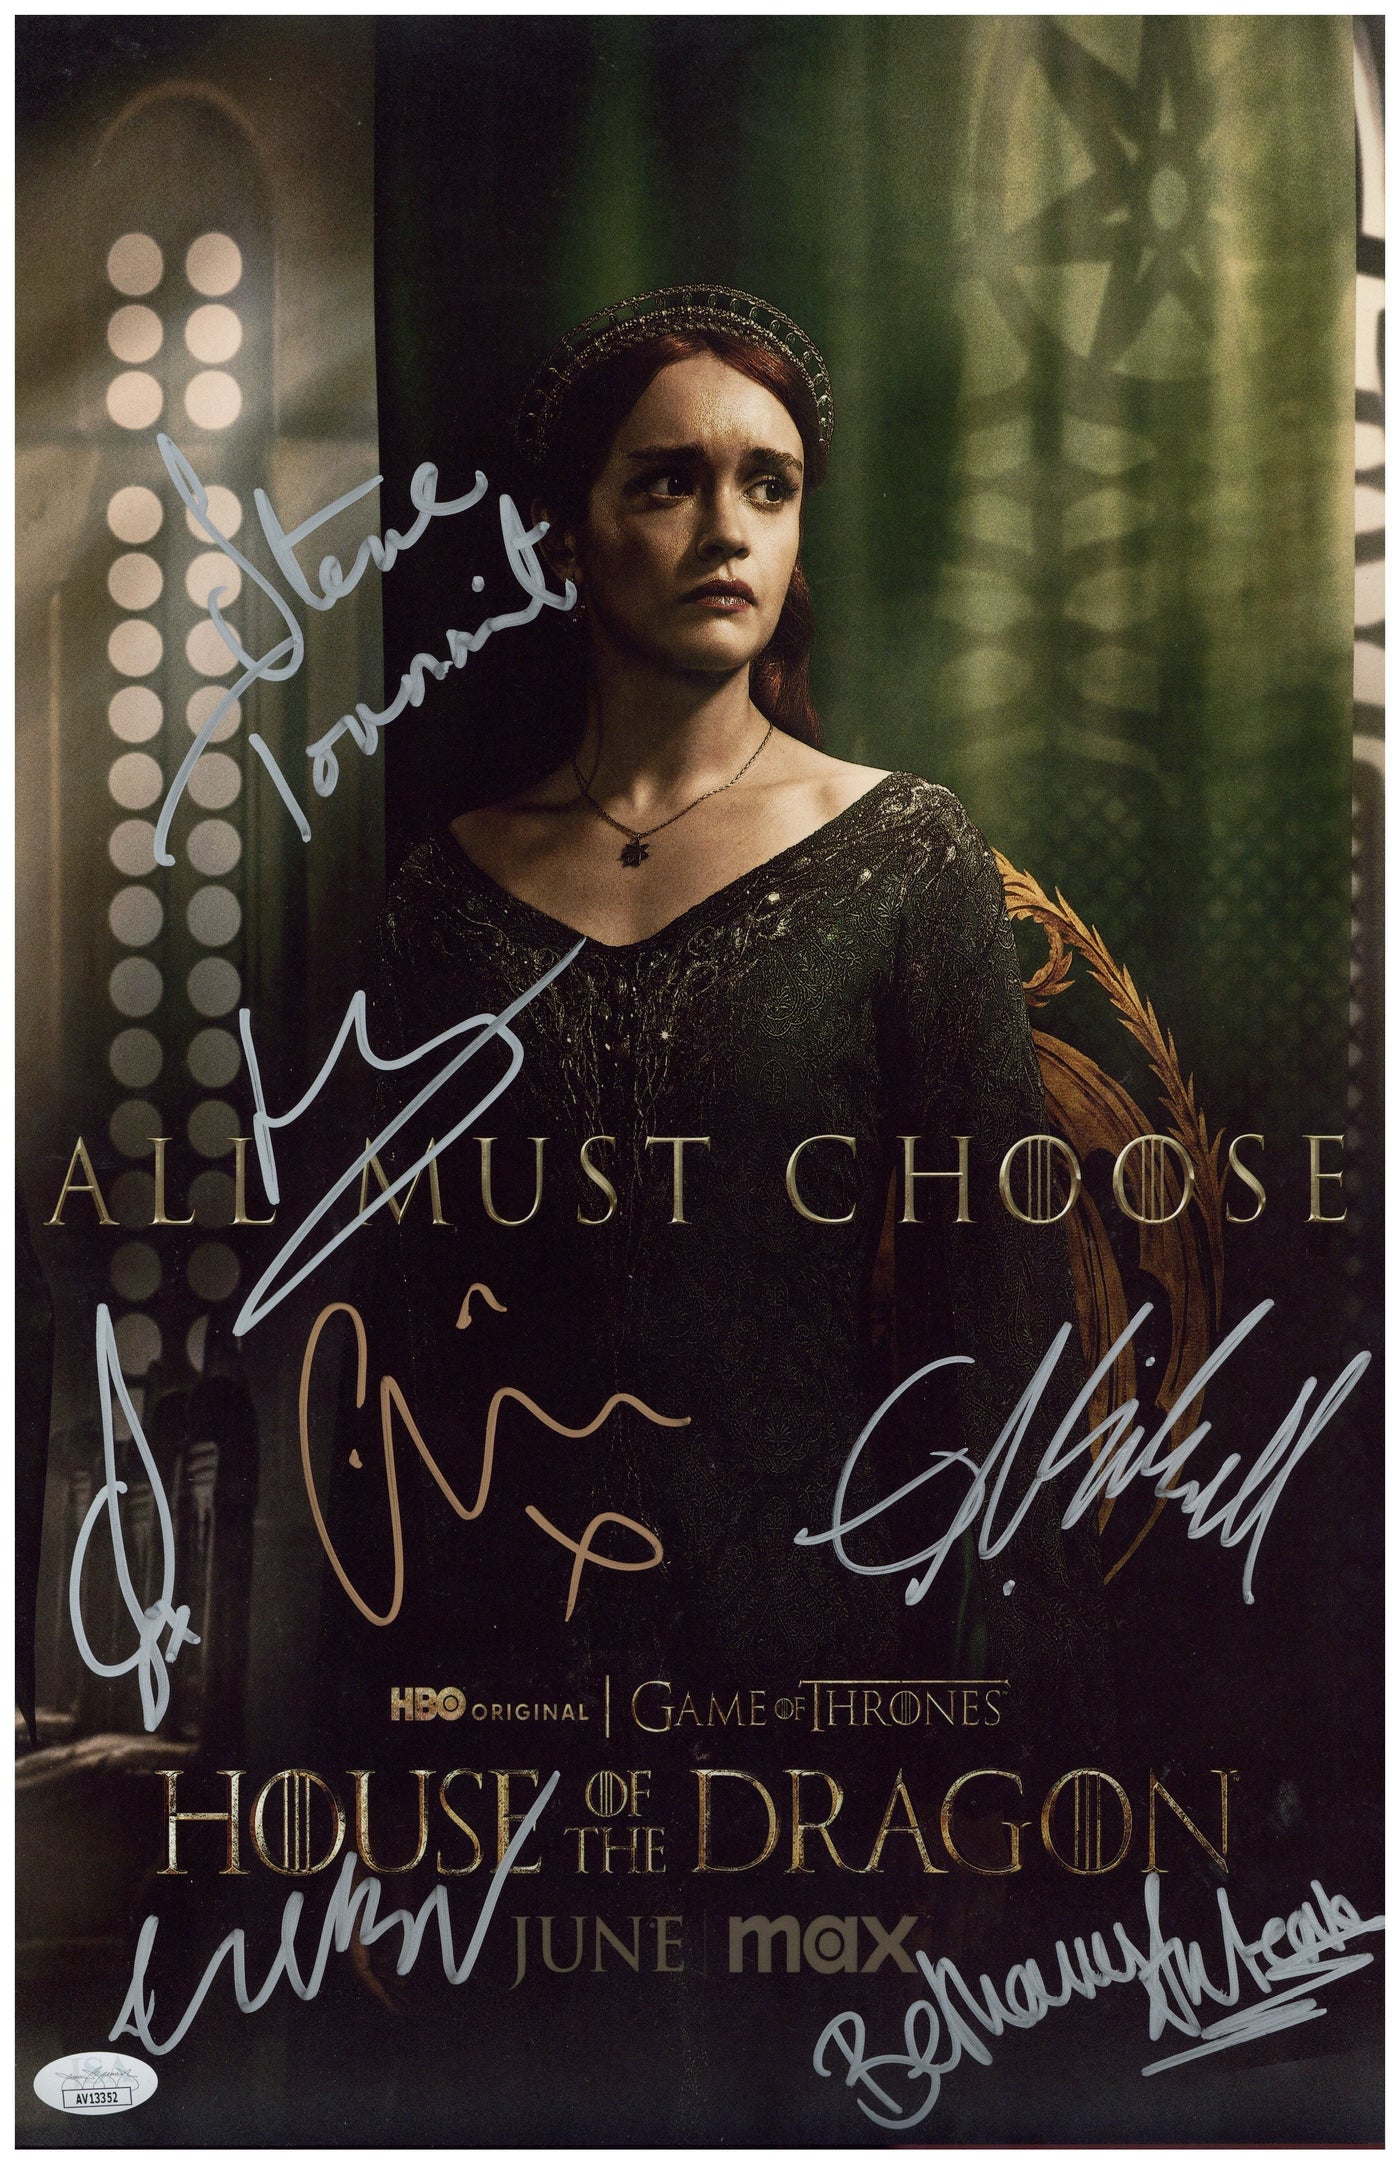 House of the Dragon Cast Signed 11x17 Photo Game of Thrones Autographed JSA COA